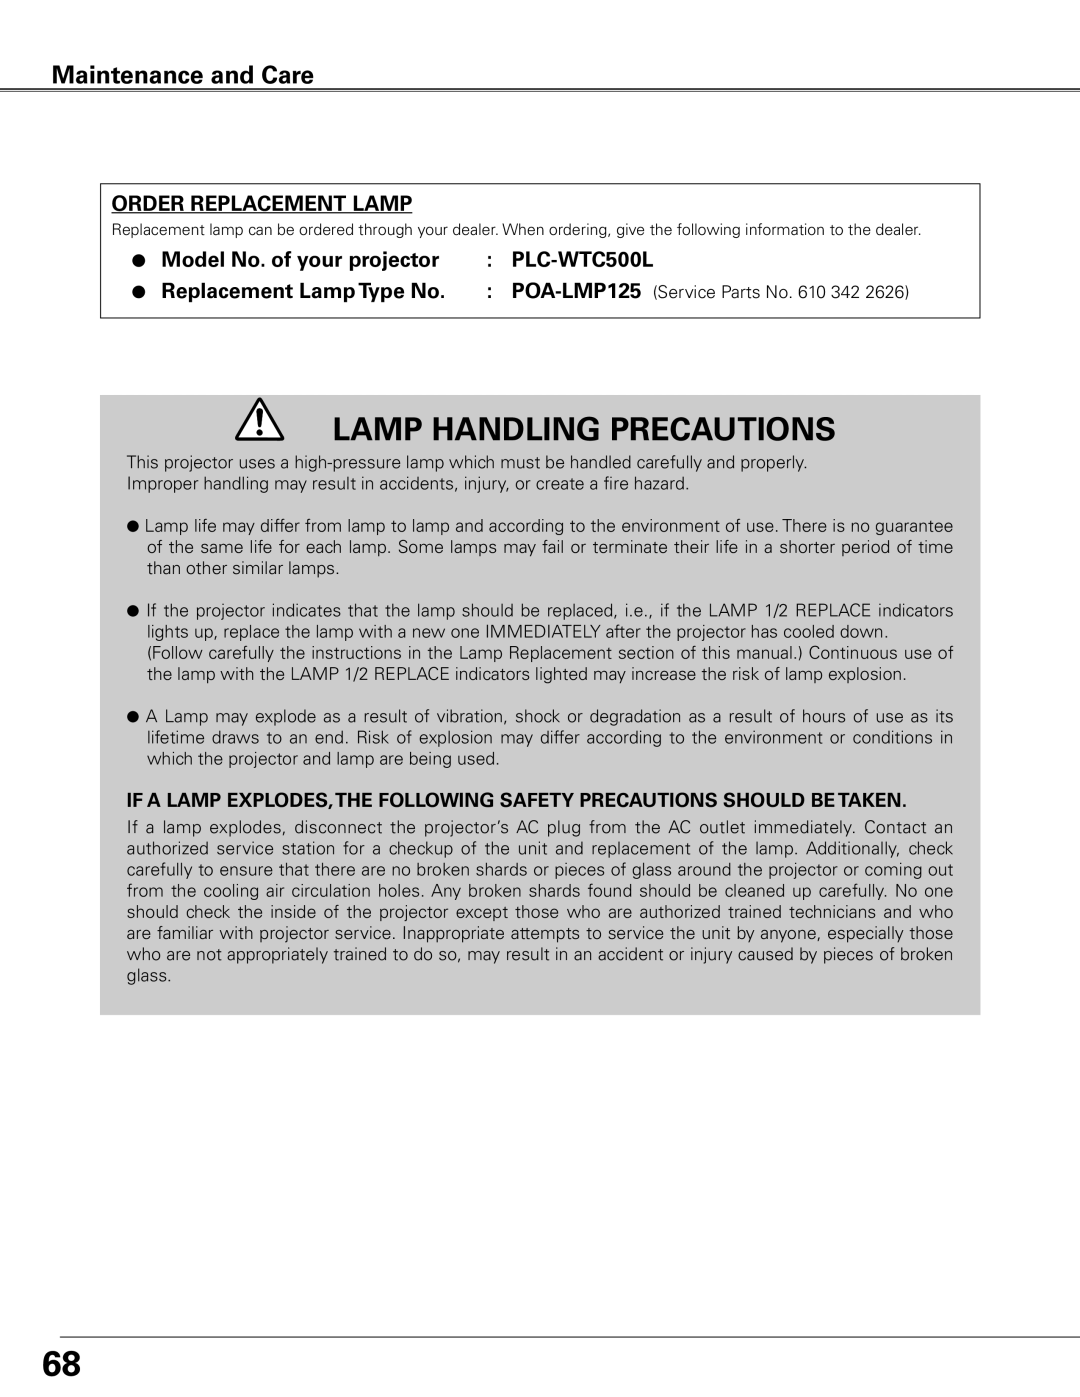 Sanyo WTC500L Lamp Handling Precautions, Maintenance and Care, Order Replacement Lamp, Model No.. of your projector 